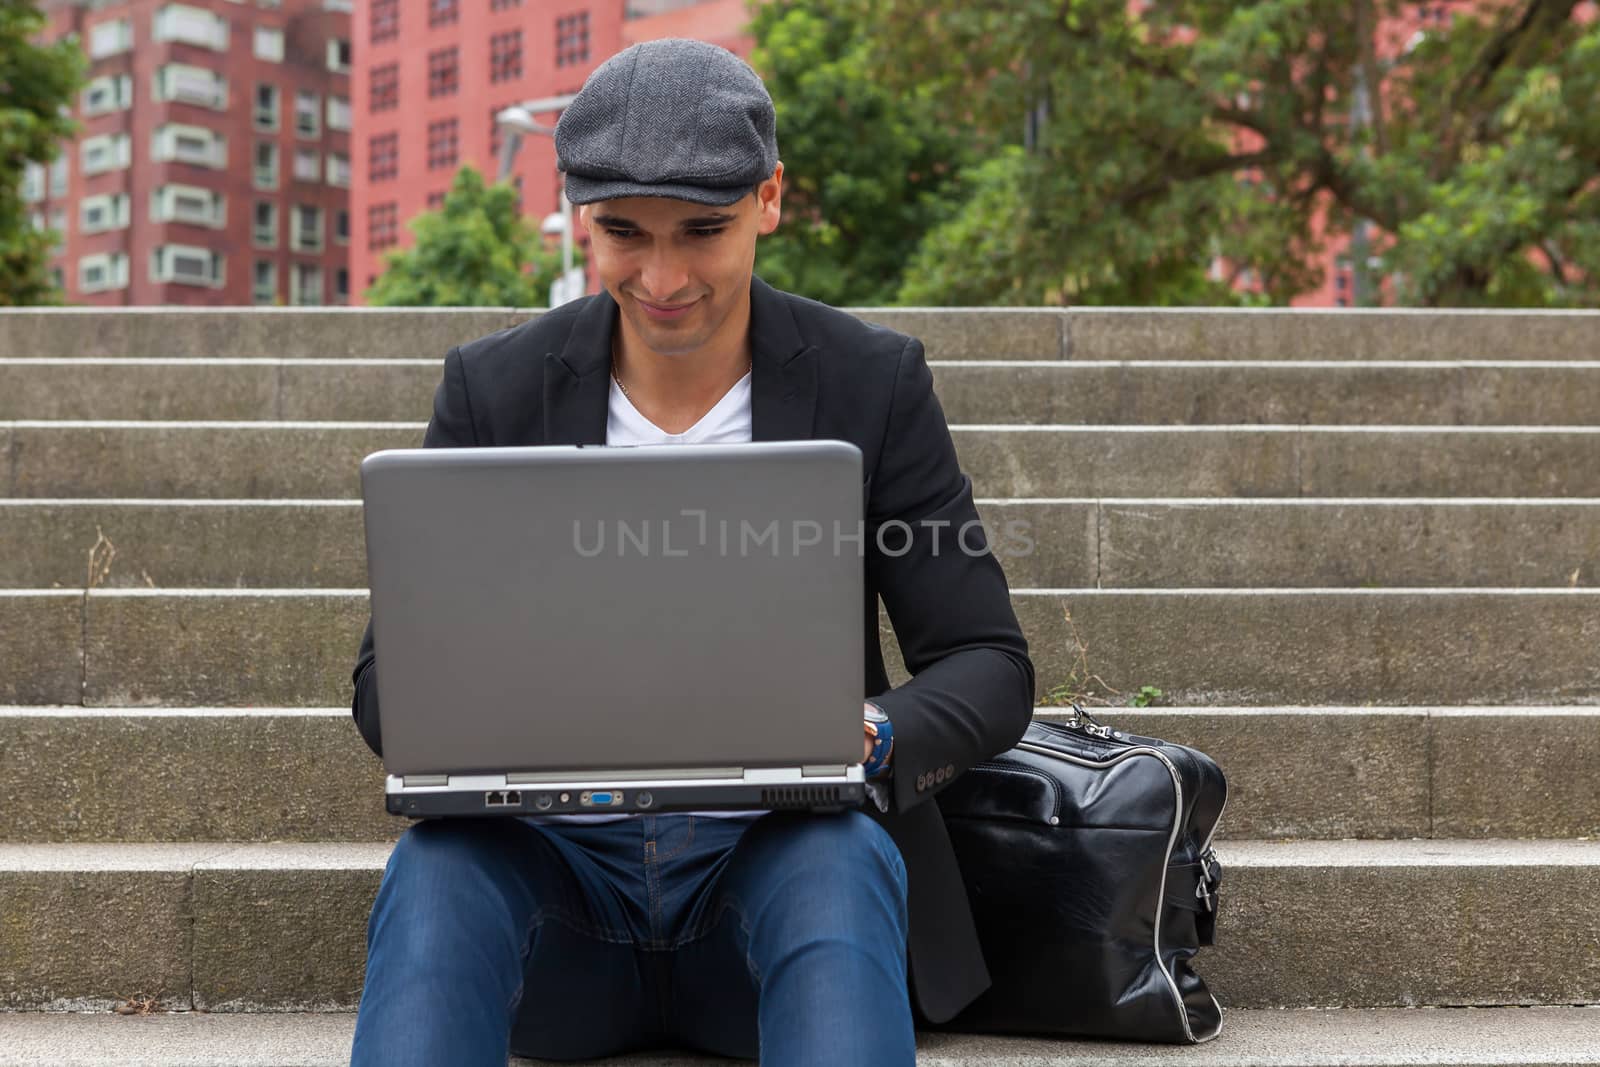 Young man with Irish beret sitting on a wall next to an urban stairs and a shoulder bag near